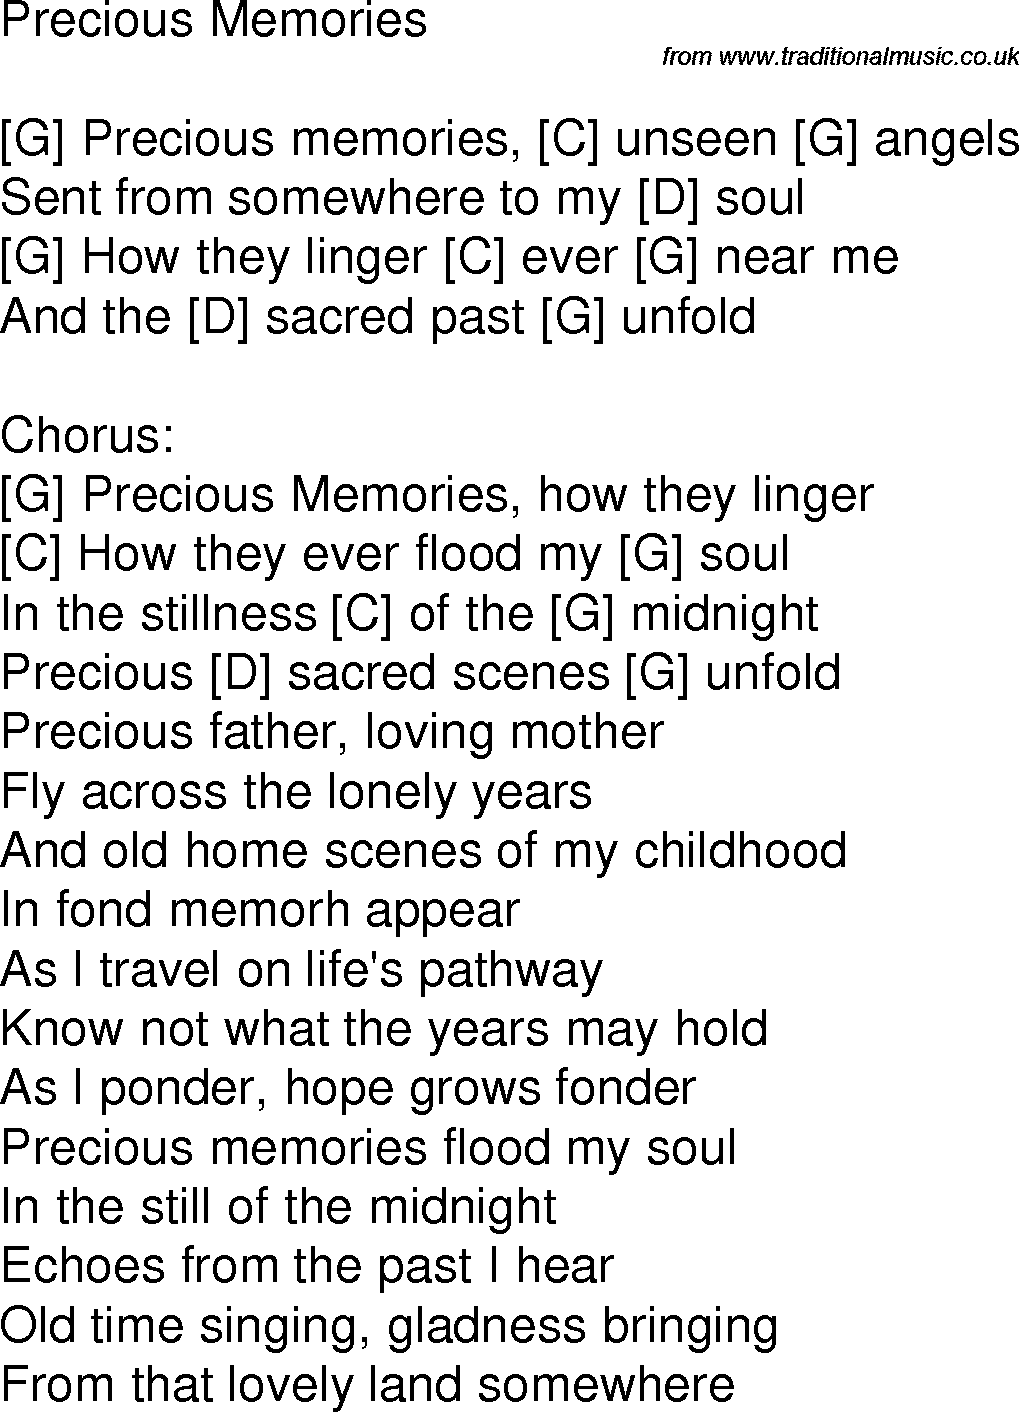 Old time song lyrics with chords for Precious Memories G